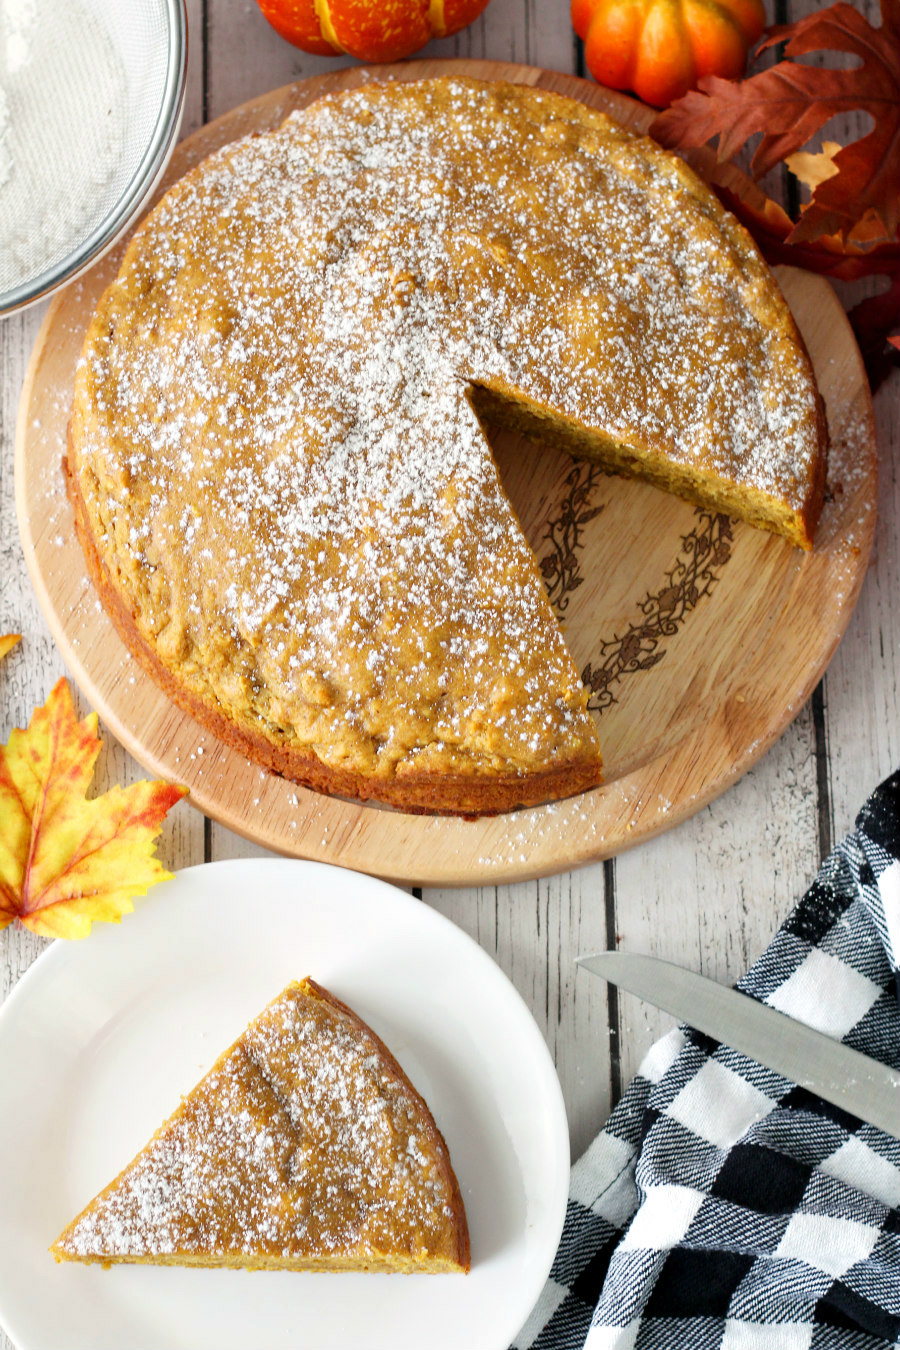 Pumpkin Spice Ricotta Cake on wooden board. Slice of cake pictured on small plate. Checkered towel, knife, powdered sugar, and autumn leaves also in photo.